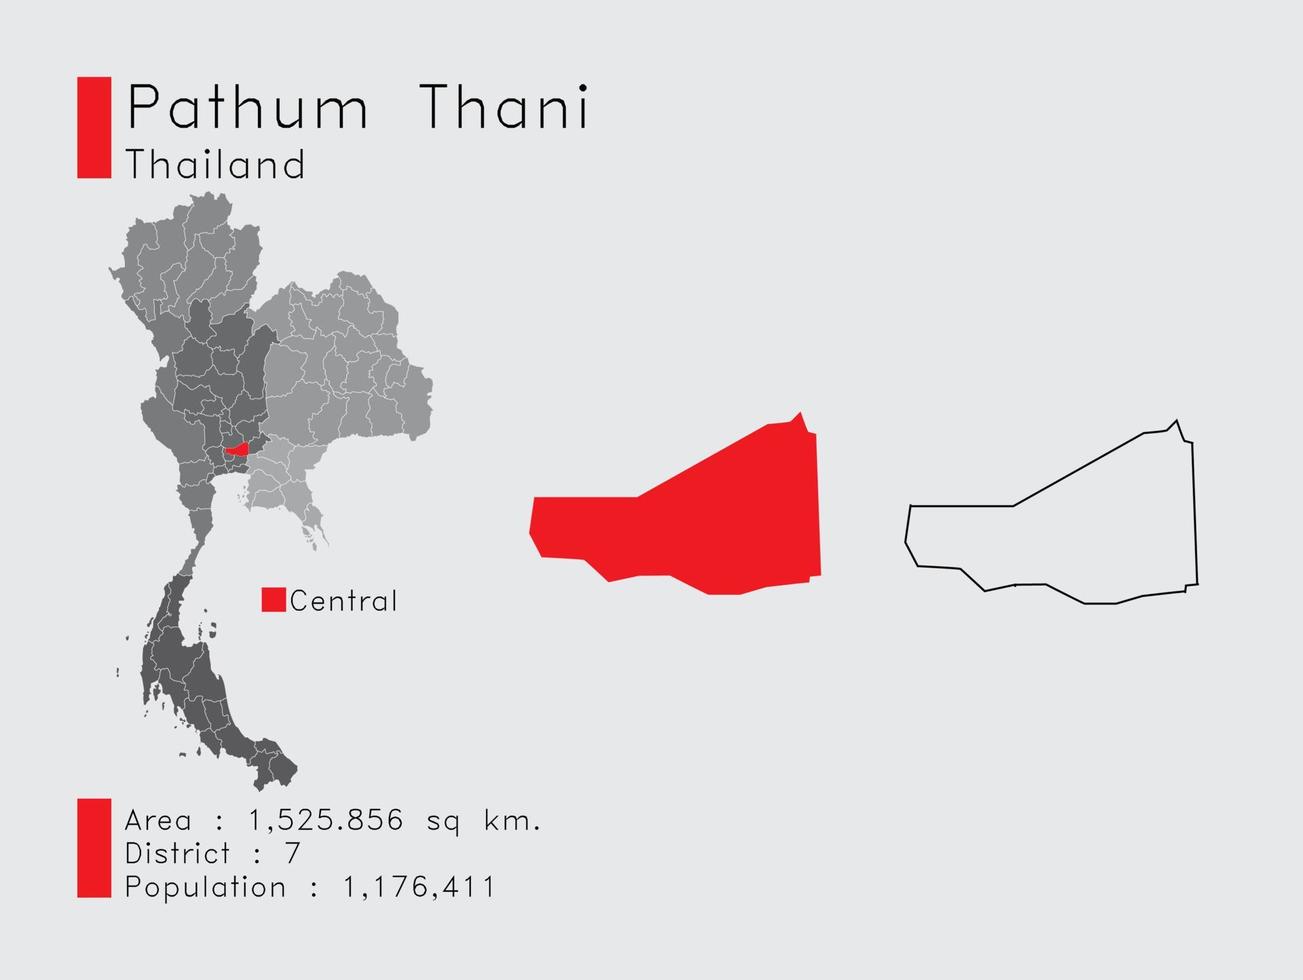 Pathum Thani Position in Thailand A Set of Infographic Elements for the Province. and Area District Population and Outline. Vector with Gray Background.